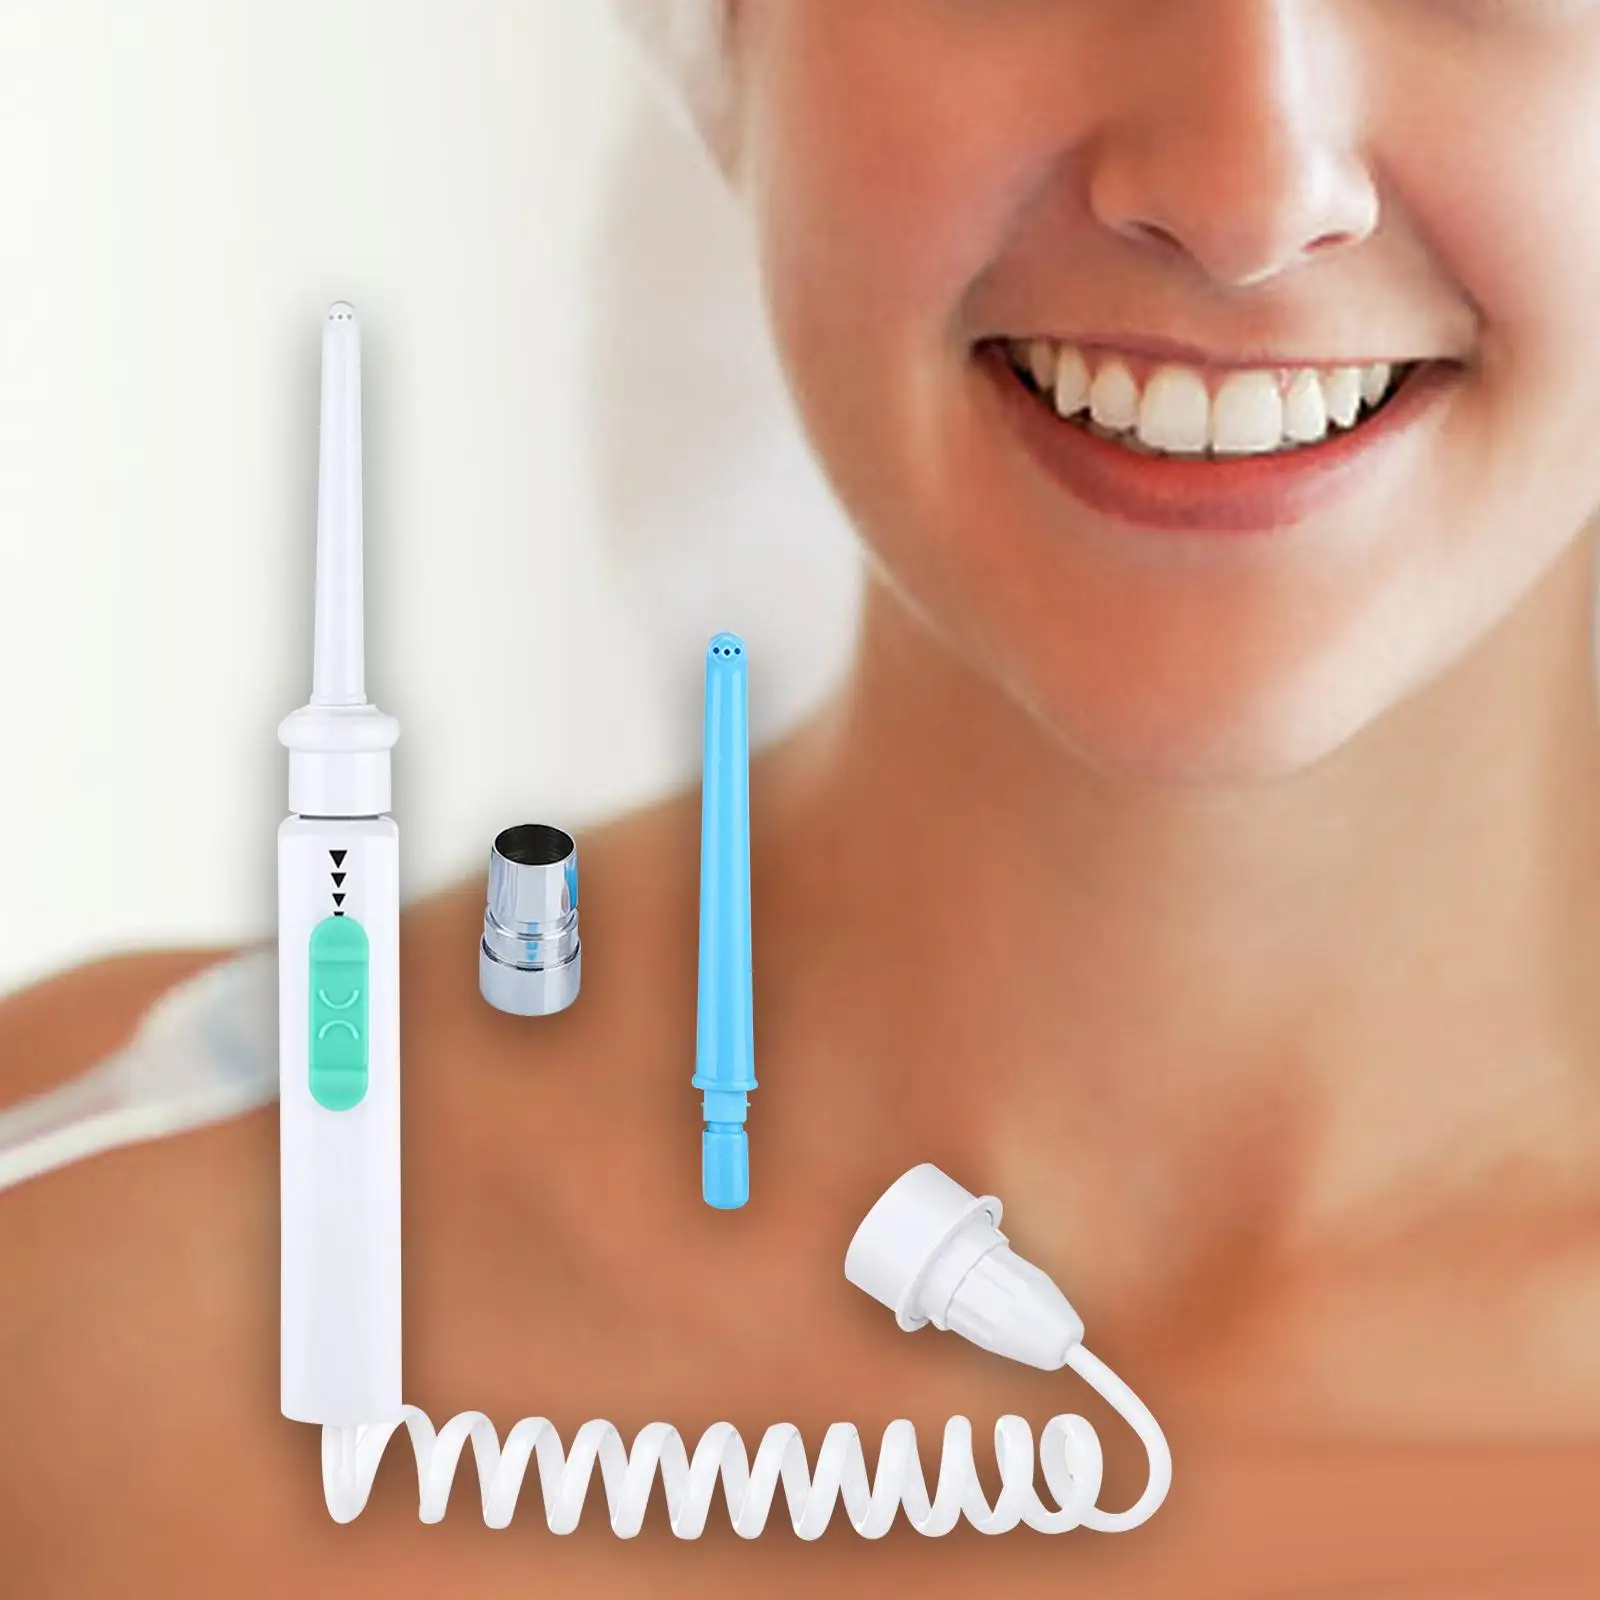 Teeth Cleaner Waterproof Portable Stain Calculus Removal Dentures Professional Tooth Cleaning Travel Scaler Water Flosser